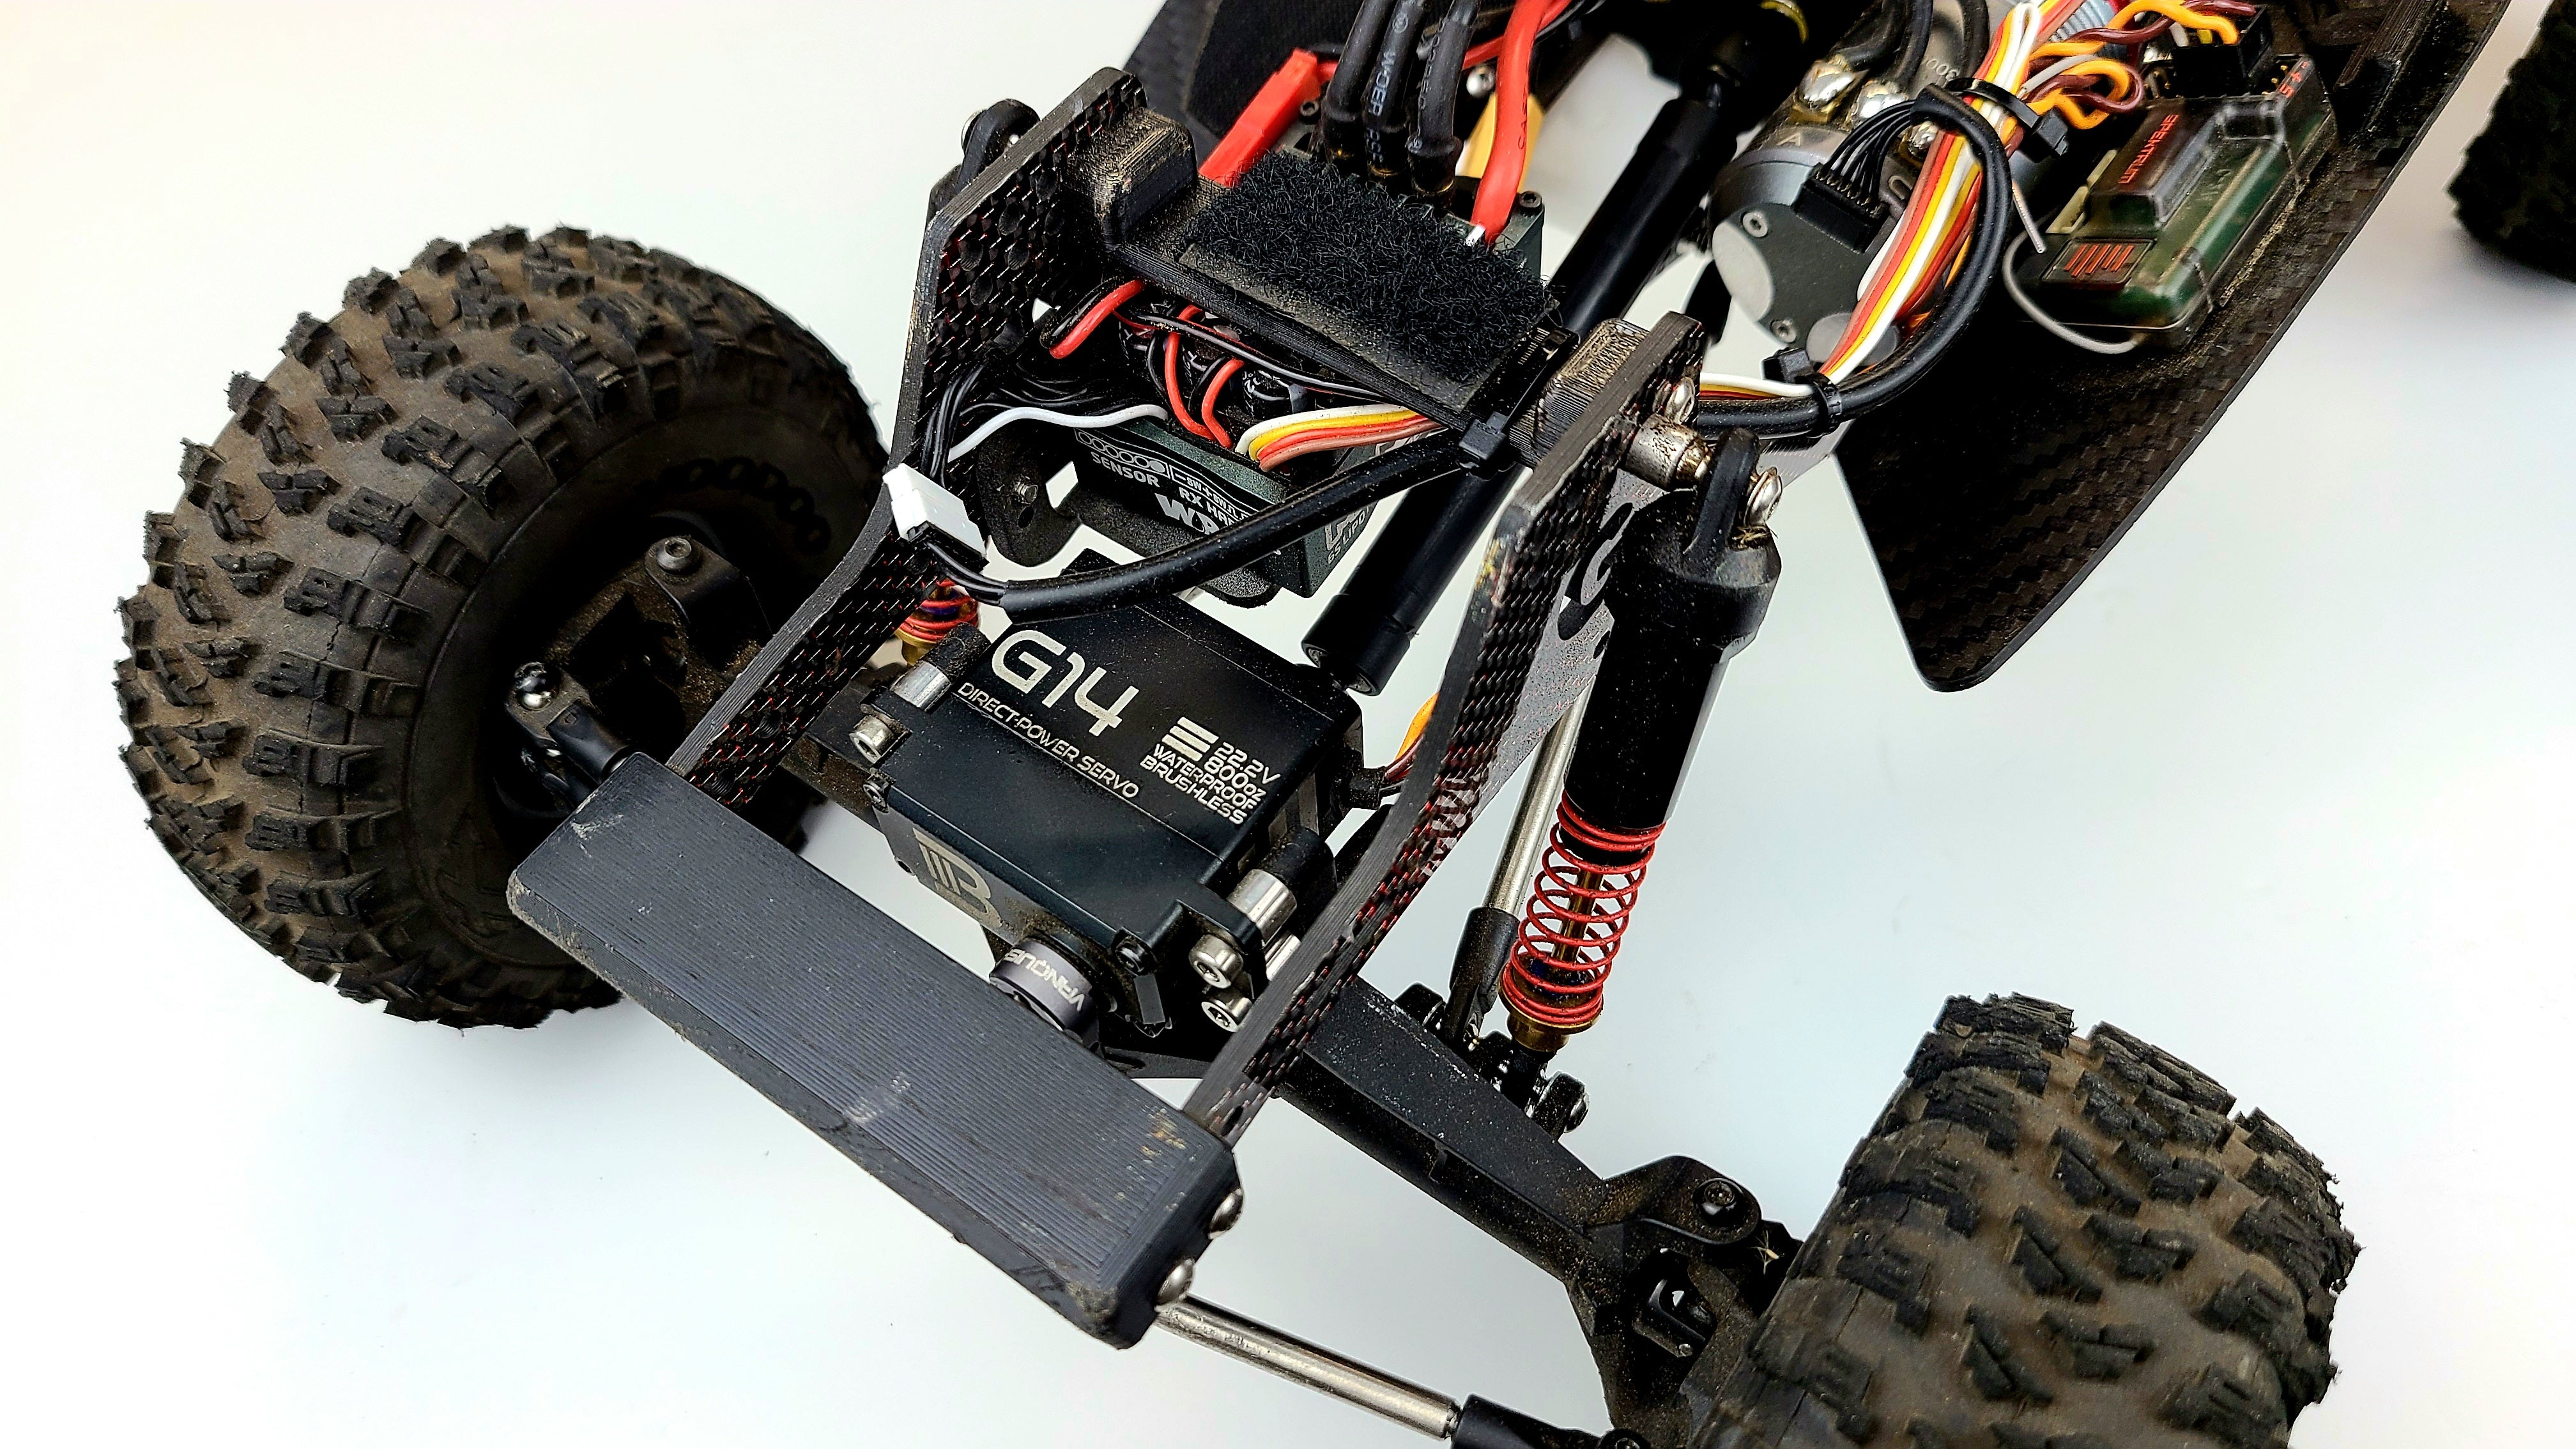 G-SHOT Performance Package for the TGH-V3 and GS-V4 chassis rails